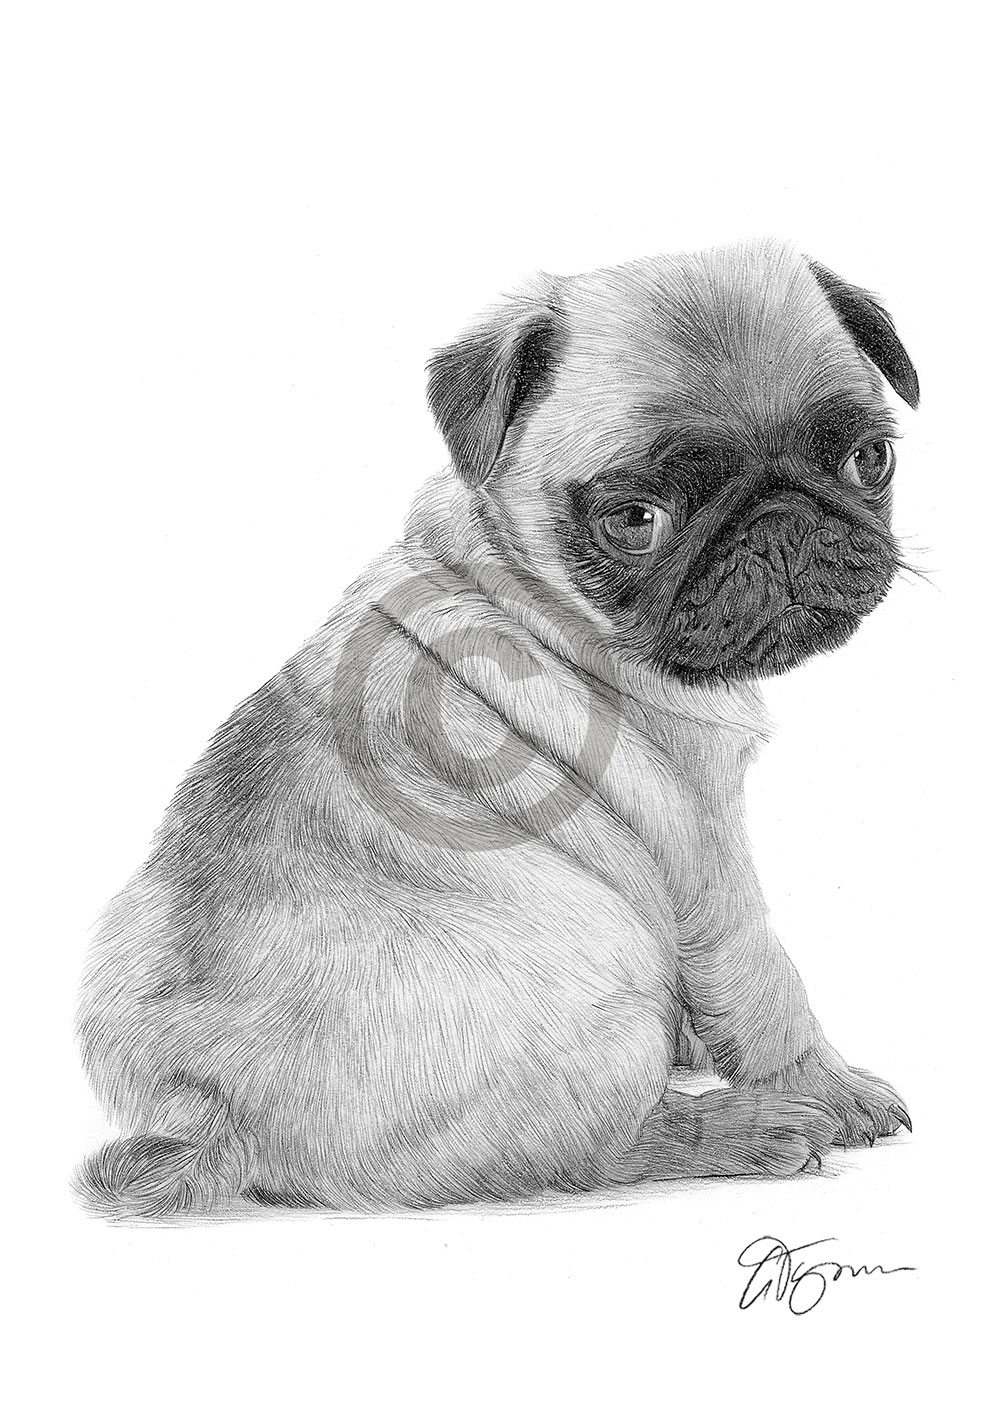 Pencil drawing of a young Pug puppy by artist Gary Tymon